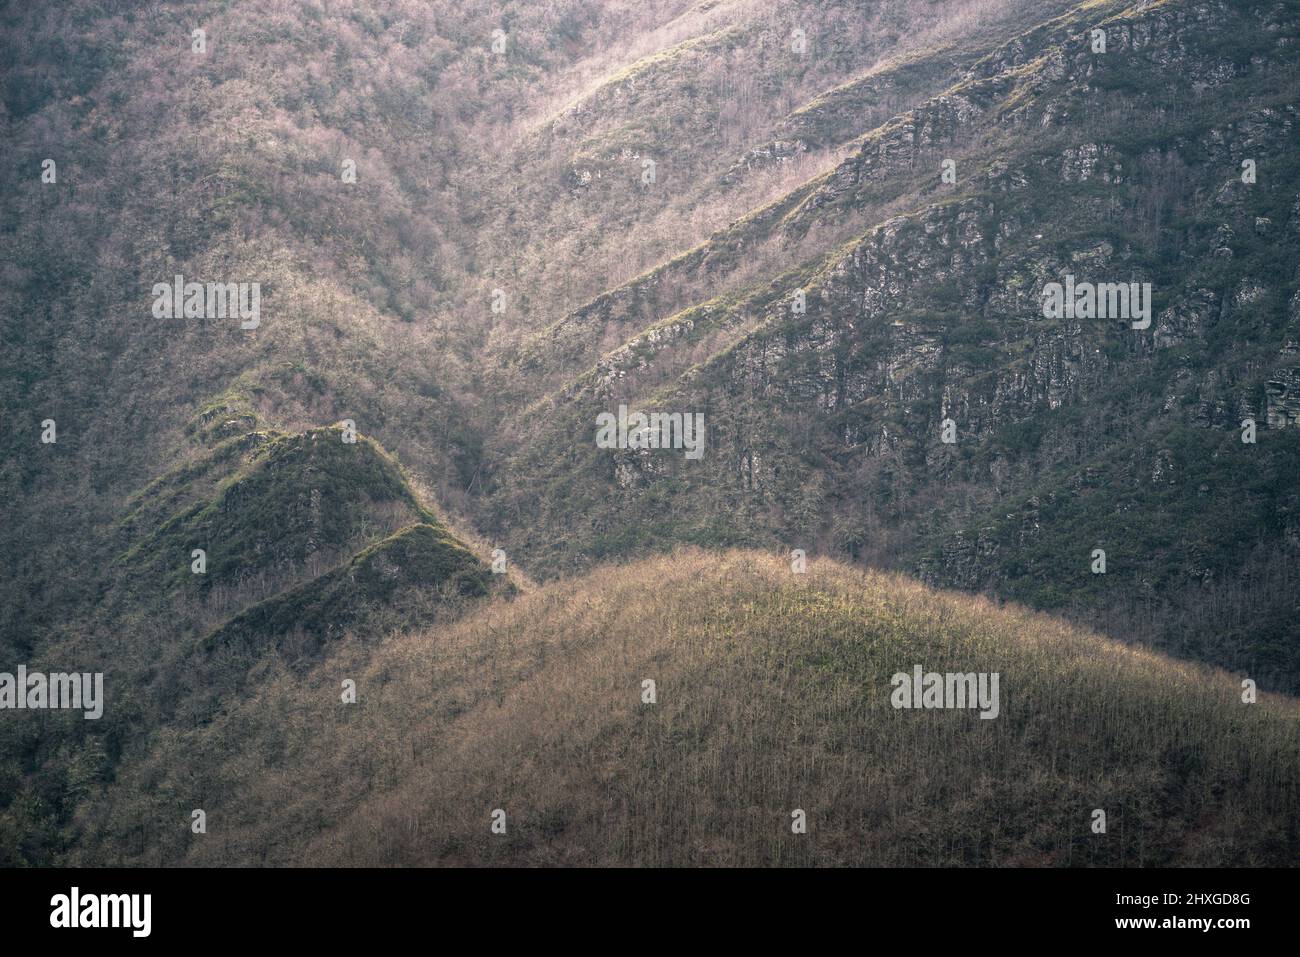 Shale outcrops rise from extensive native forests in the Courel Mountains Geopark in Galicia Stock Photo